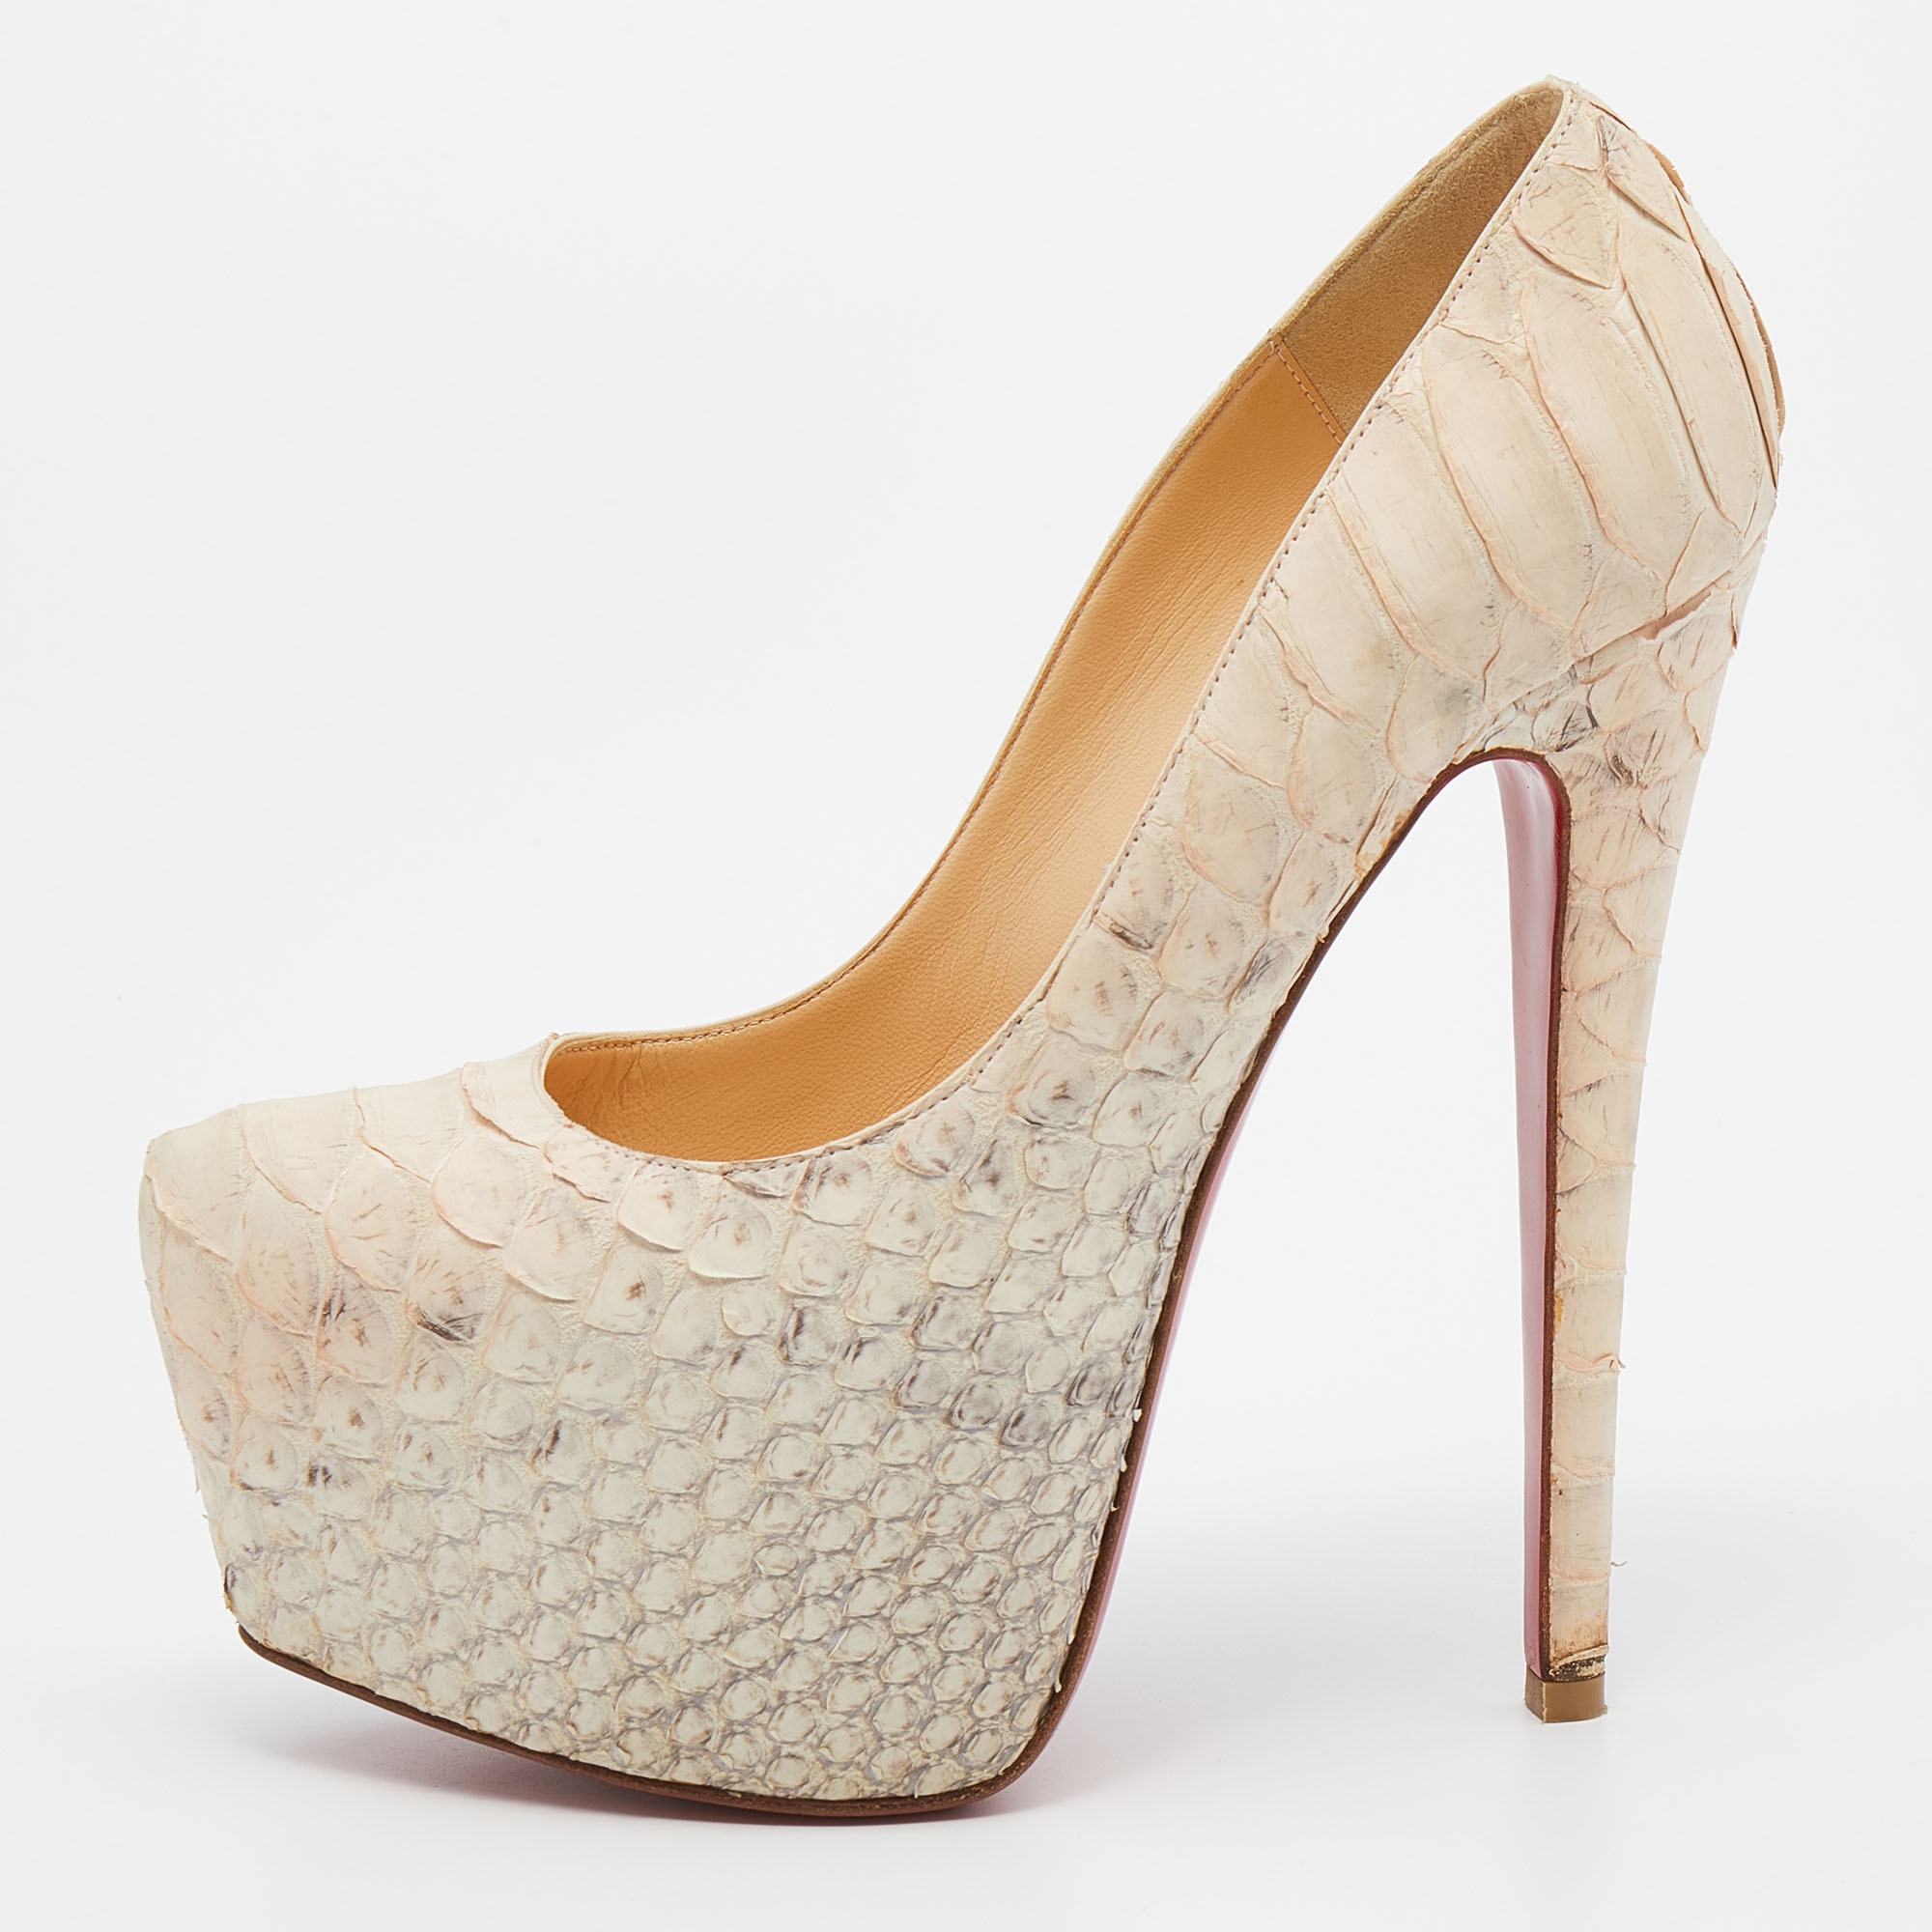 Pre-owned Christian Louboutin Beige Python Leather Daffodile Platform Pumps Size 36